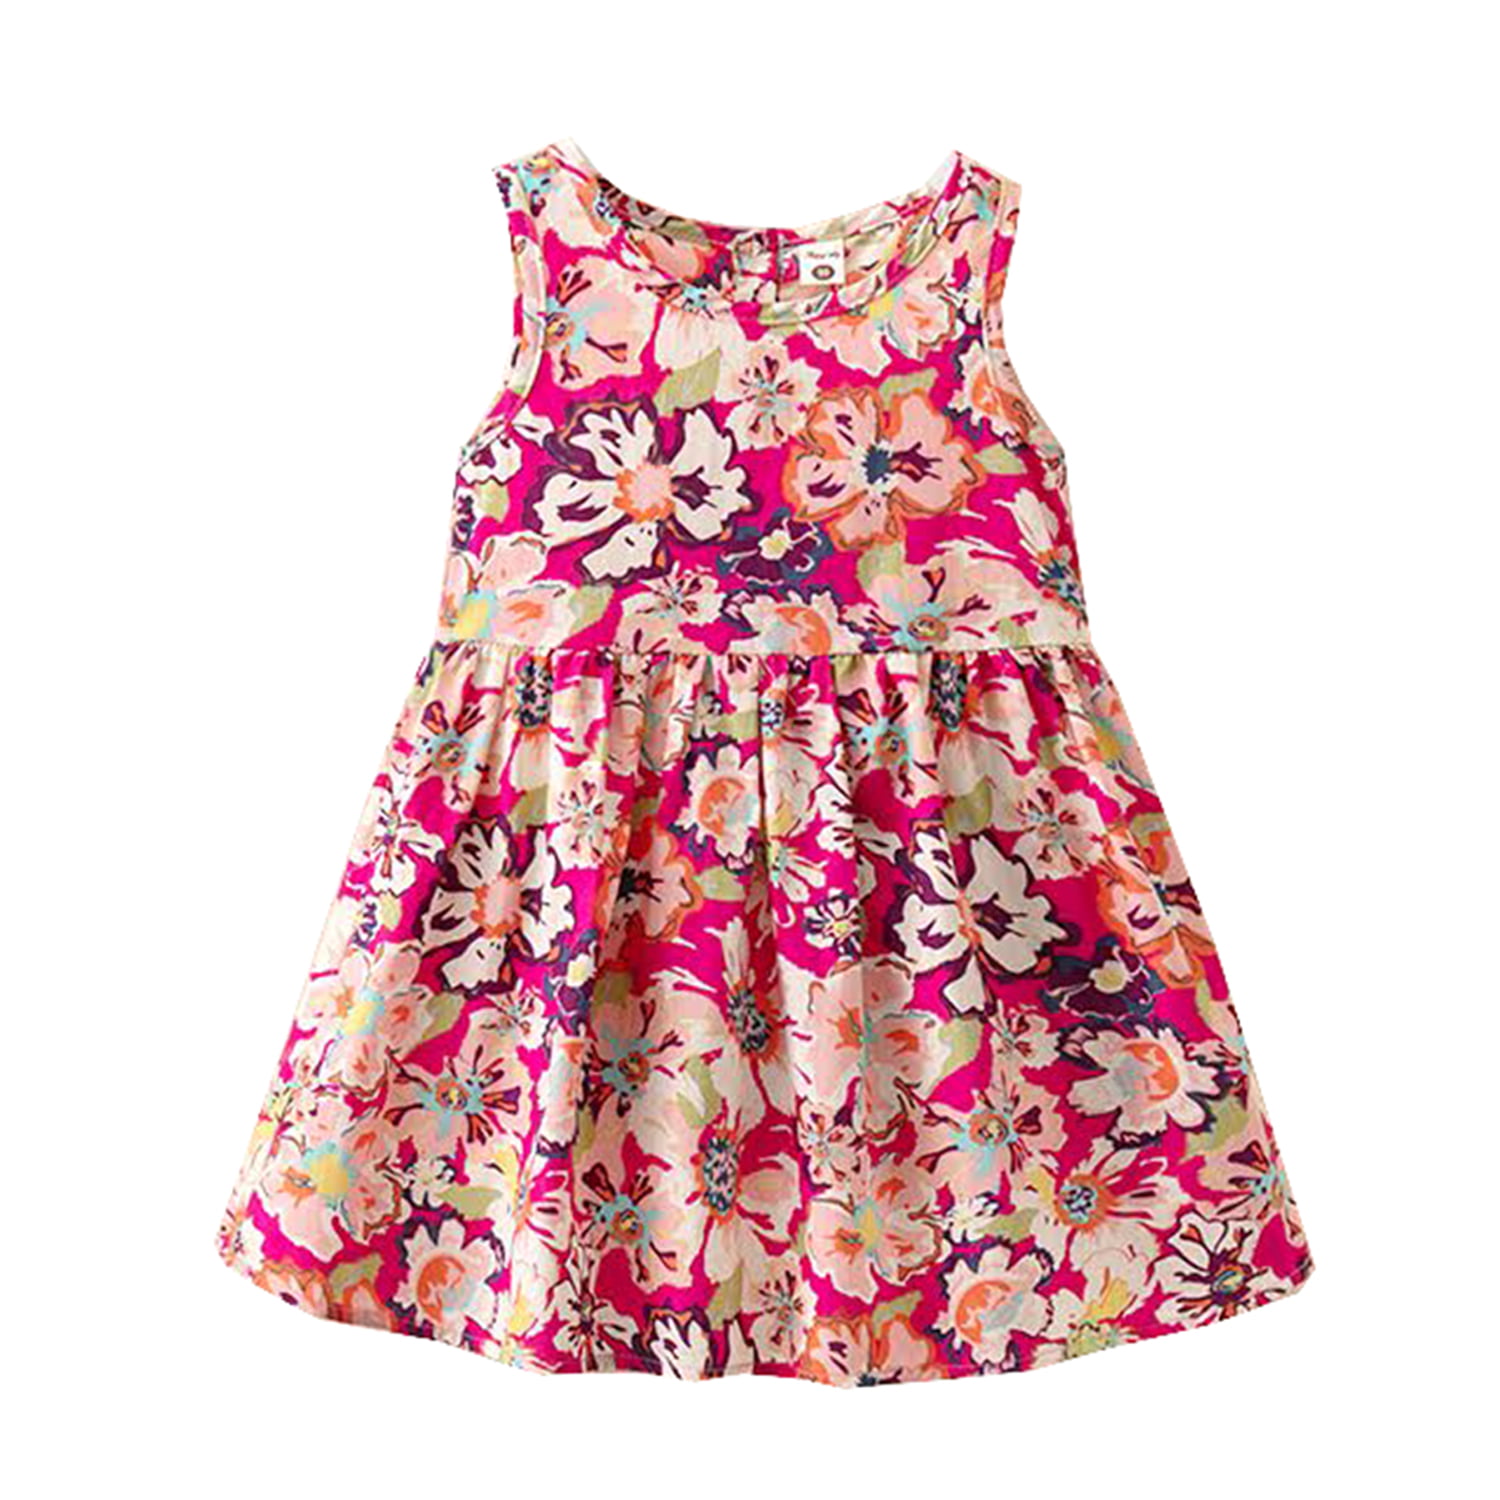 Styles I Love Baby Little Girl Colorful Floral Sleeveless Cotton Dress ...